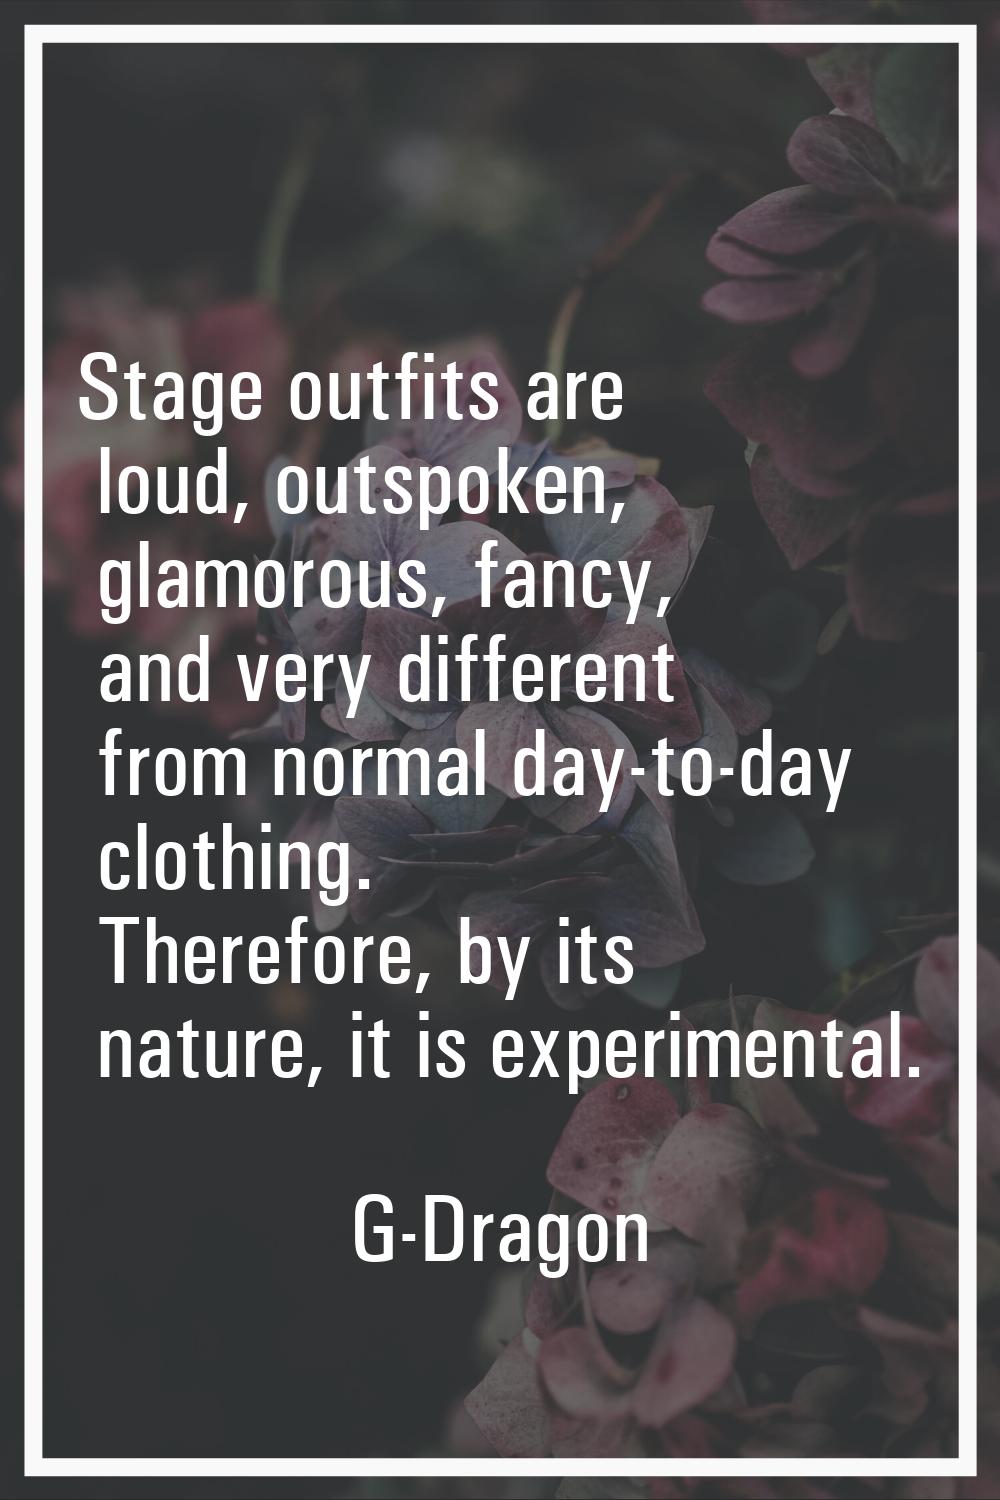 Stage outfits are loud, outspoken, glamorous, fancy, and very different from normal day-to-day clot